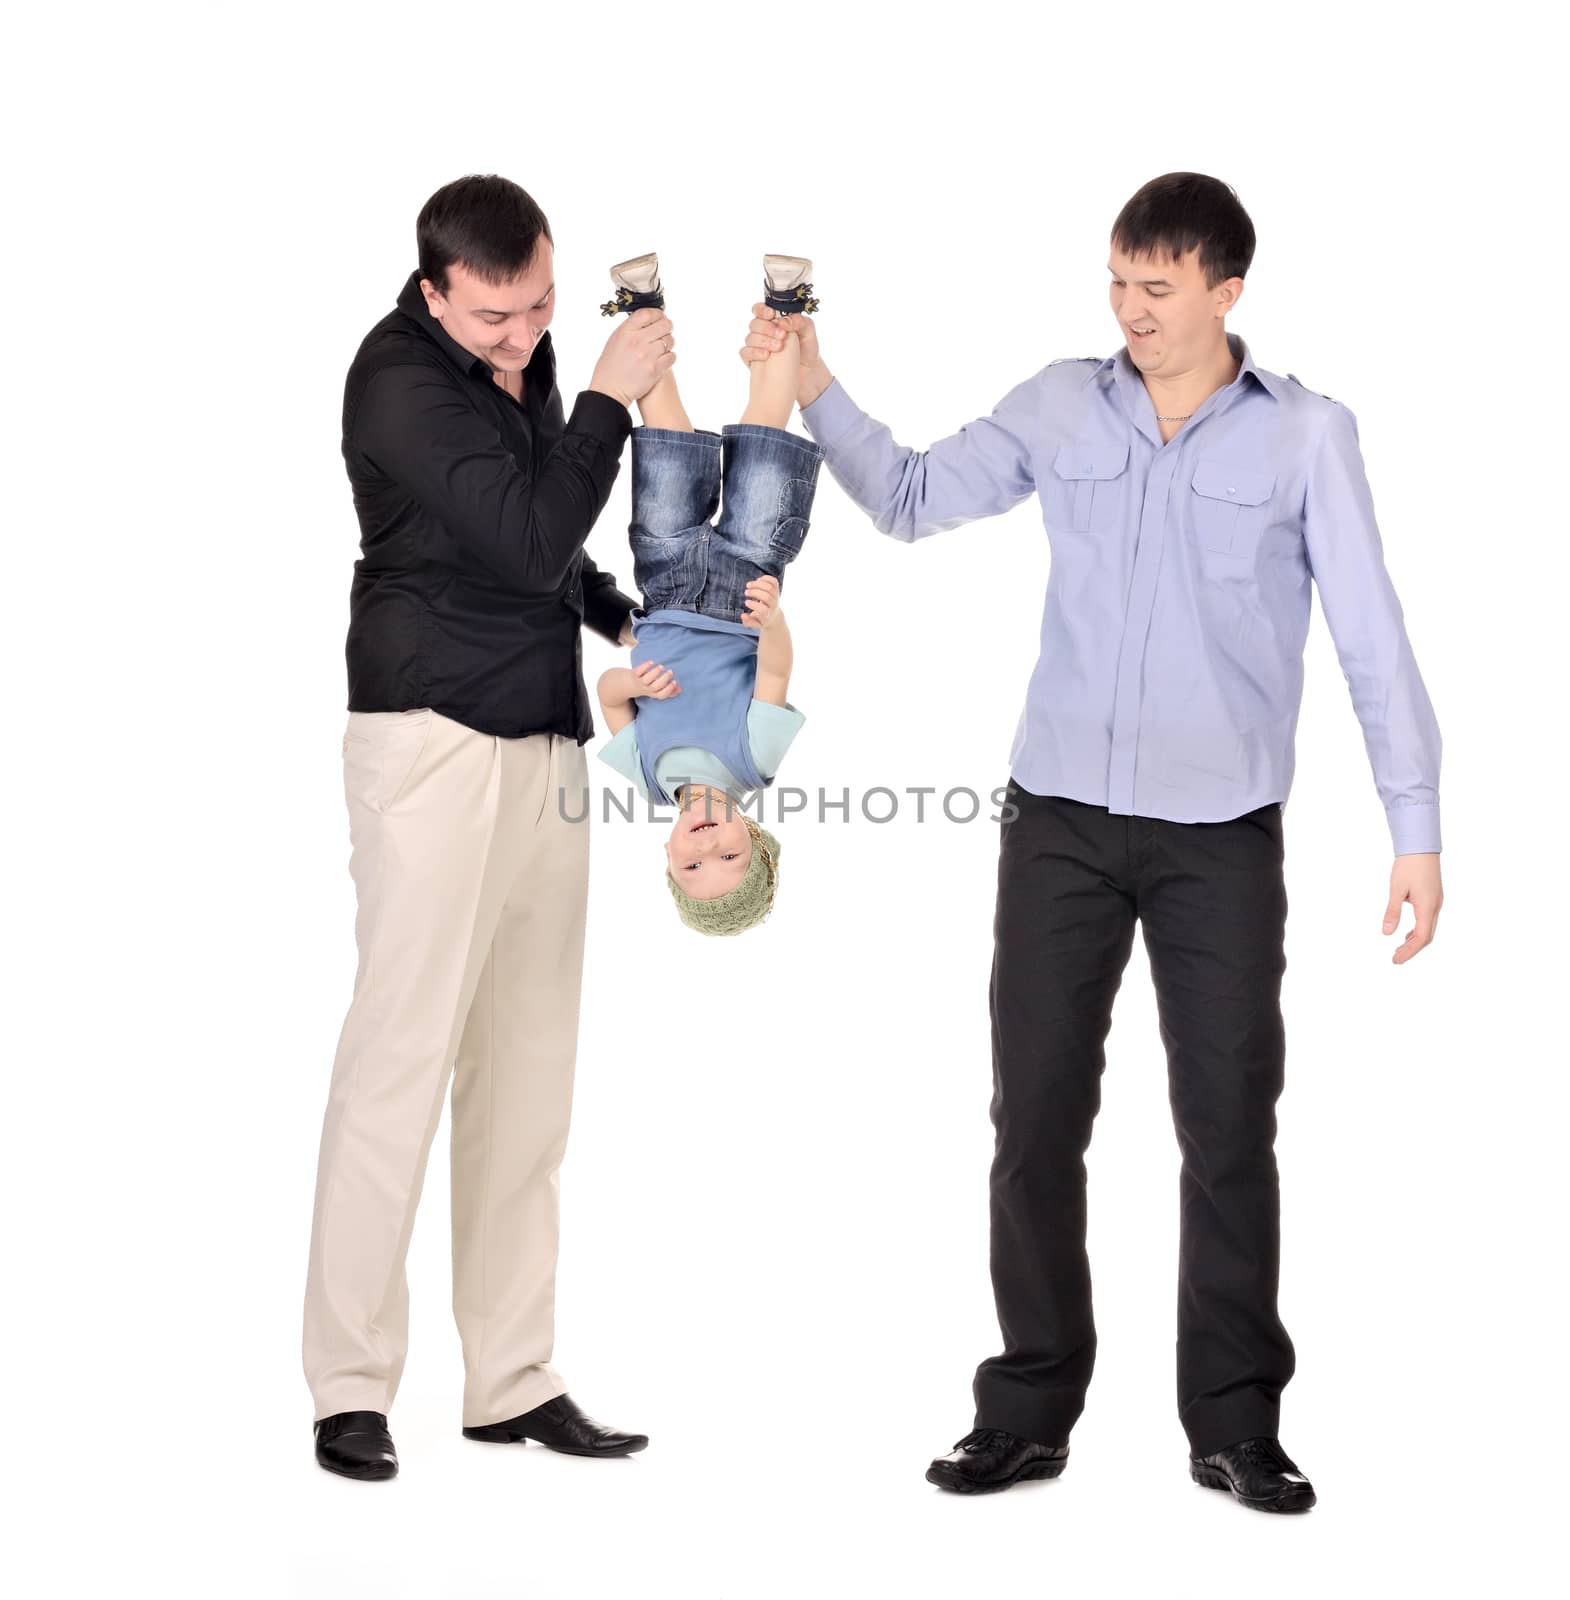 Two gusd holding little boy upside down at the white background